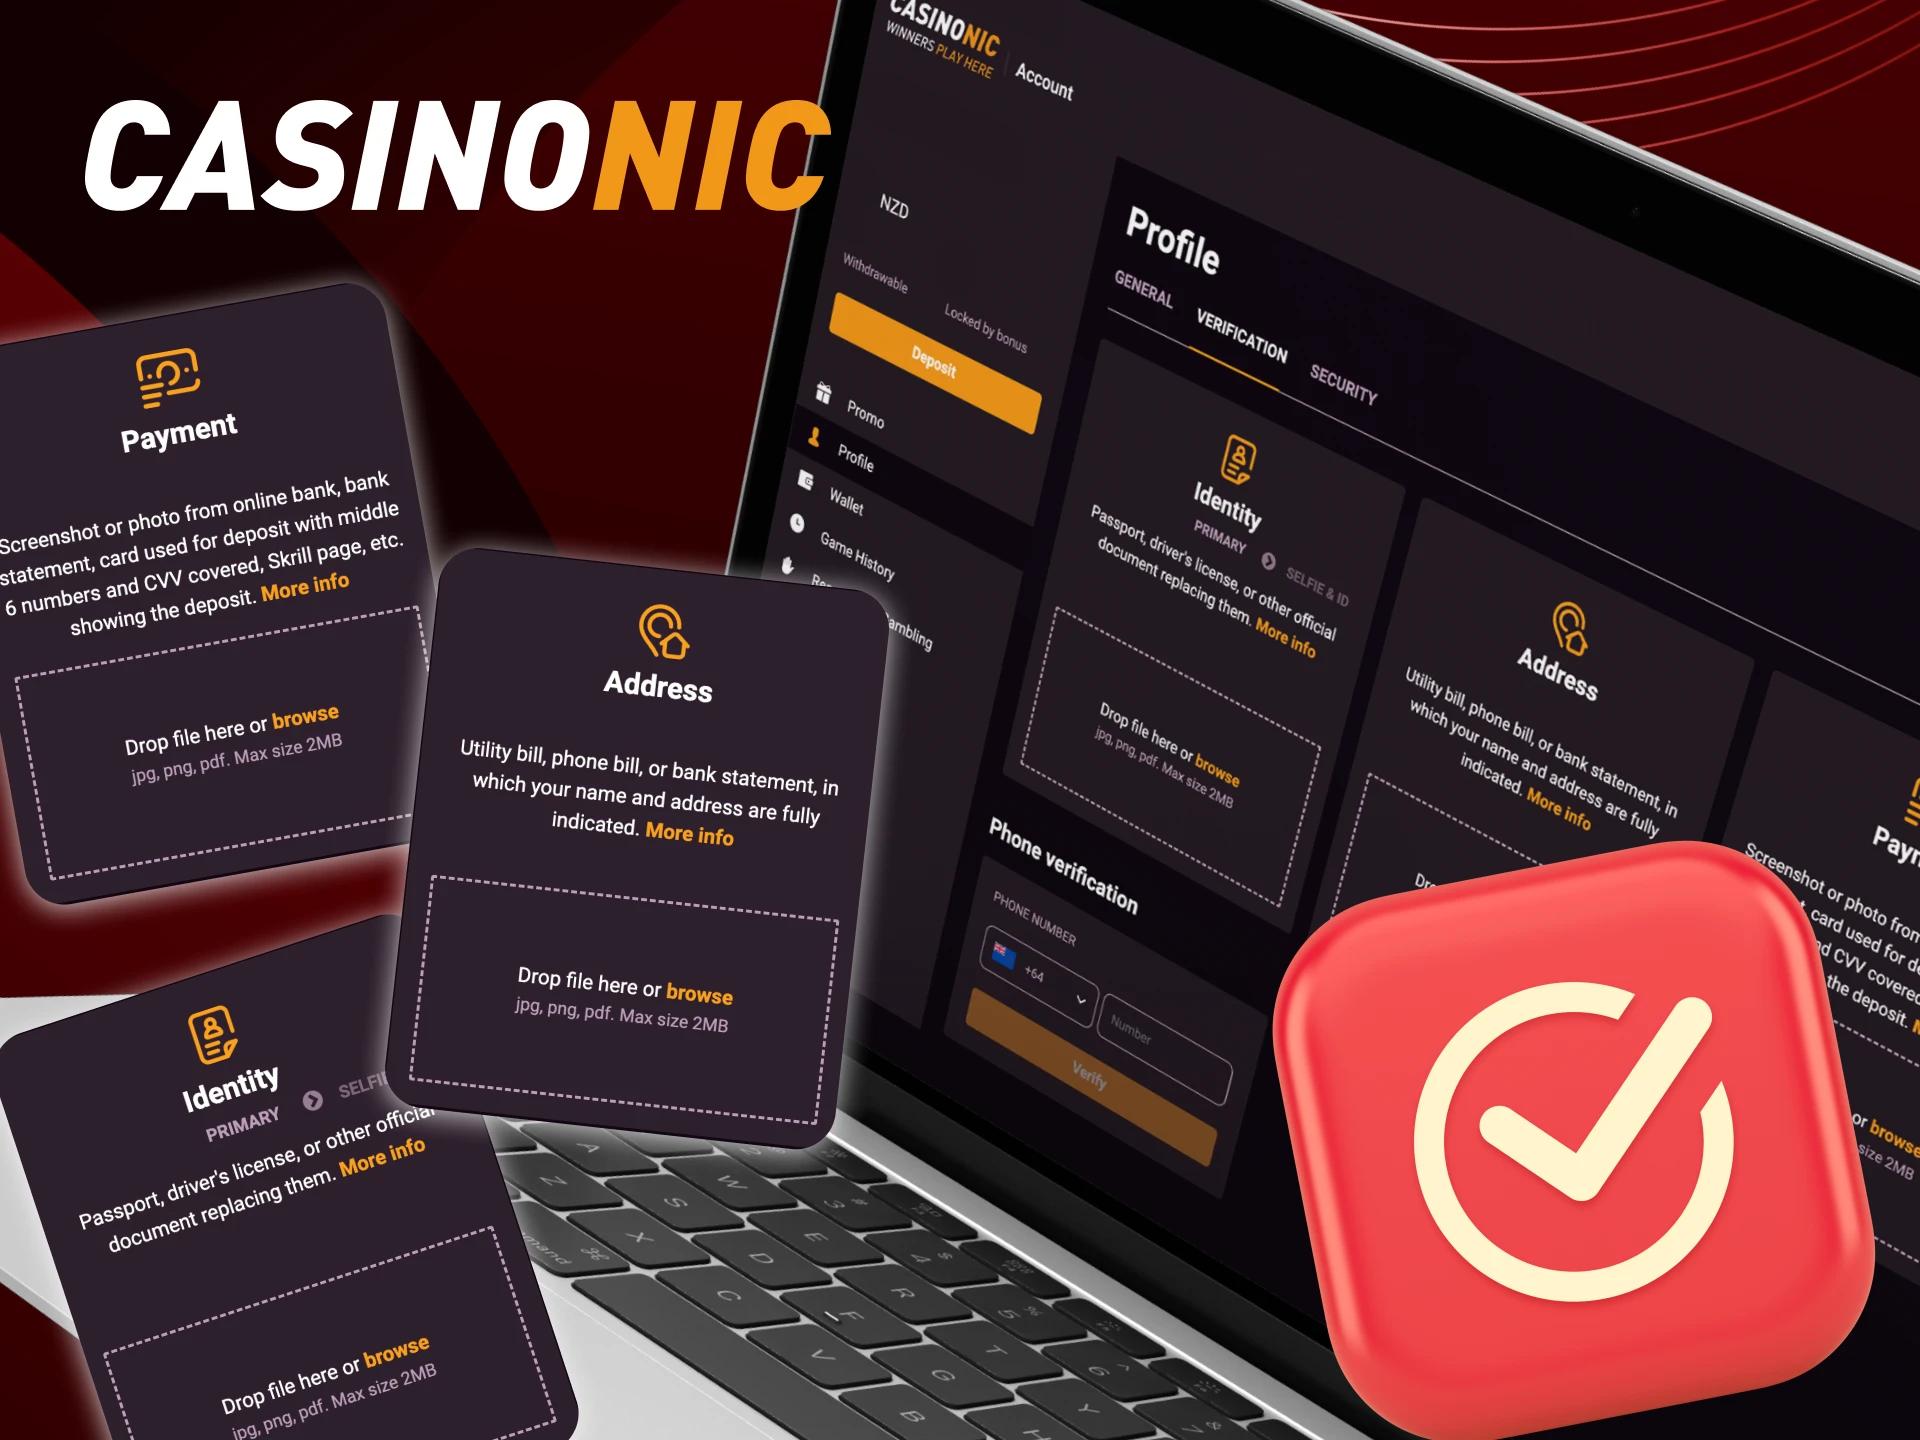 What are the ways to verify your account in the online casino CasinoNic.